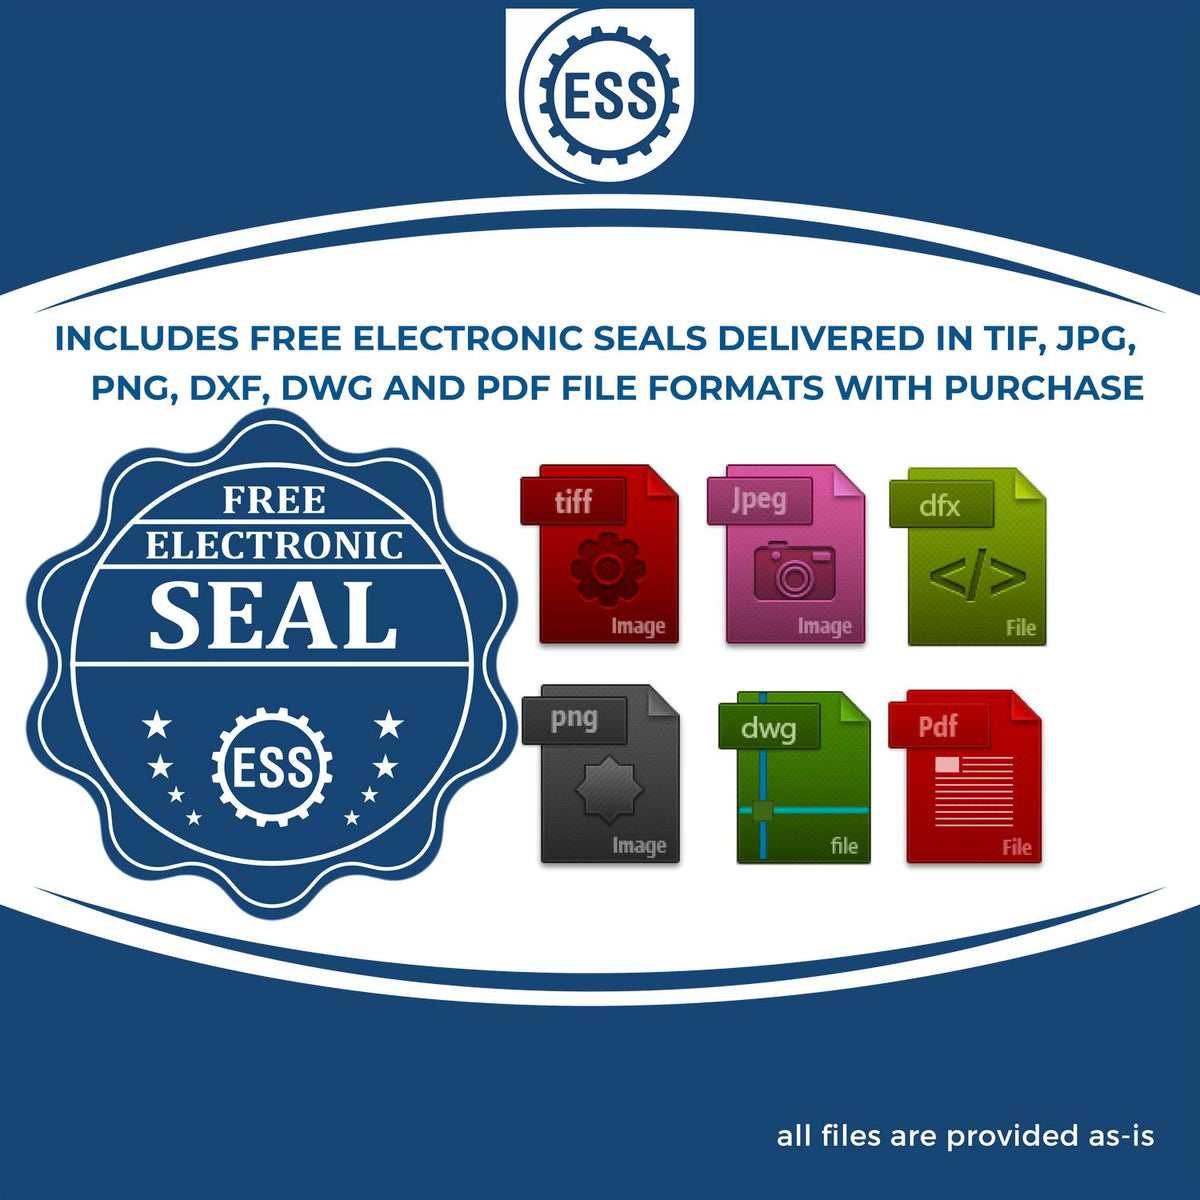 An infographic for the free electronic seal for the Premium MaxLight Pre-Inked New Hampshire Geology Stamp illustrating the different file type icons such as DXF, DWG, TIF, JPG and PNG.